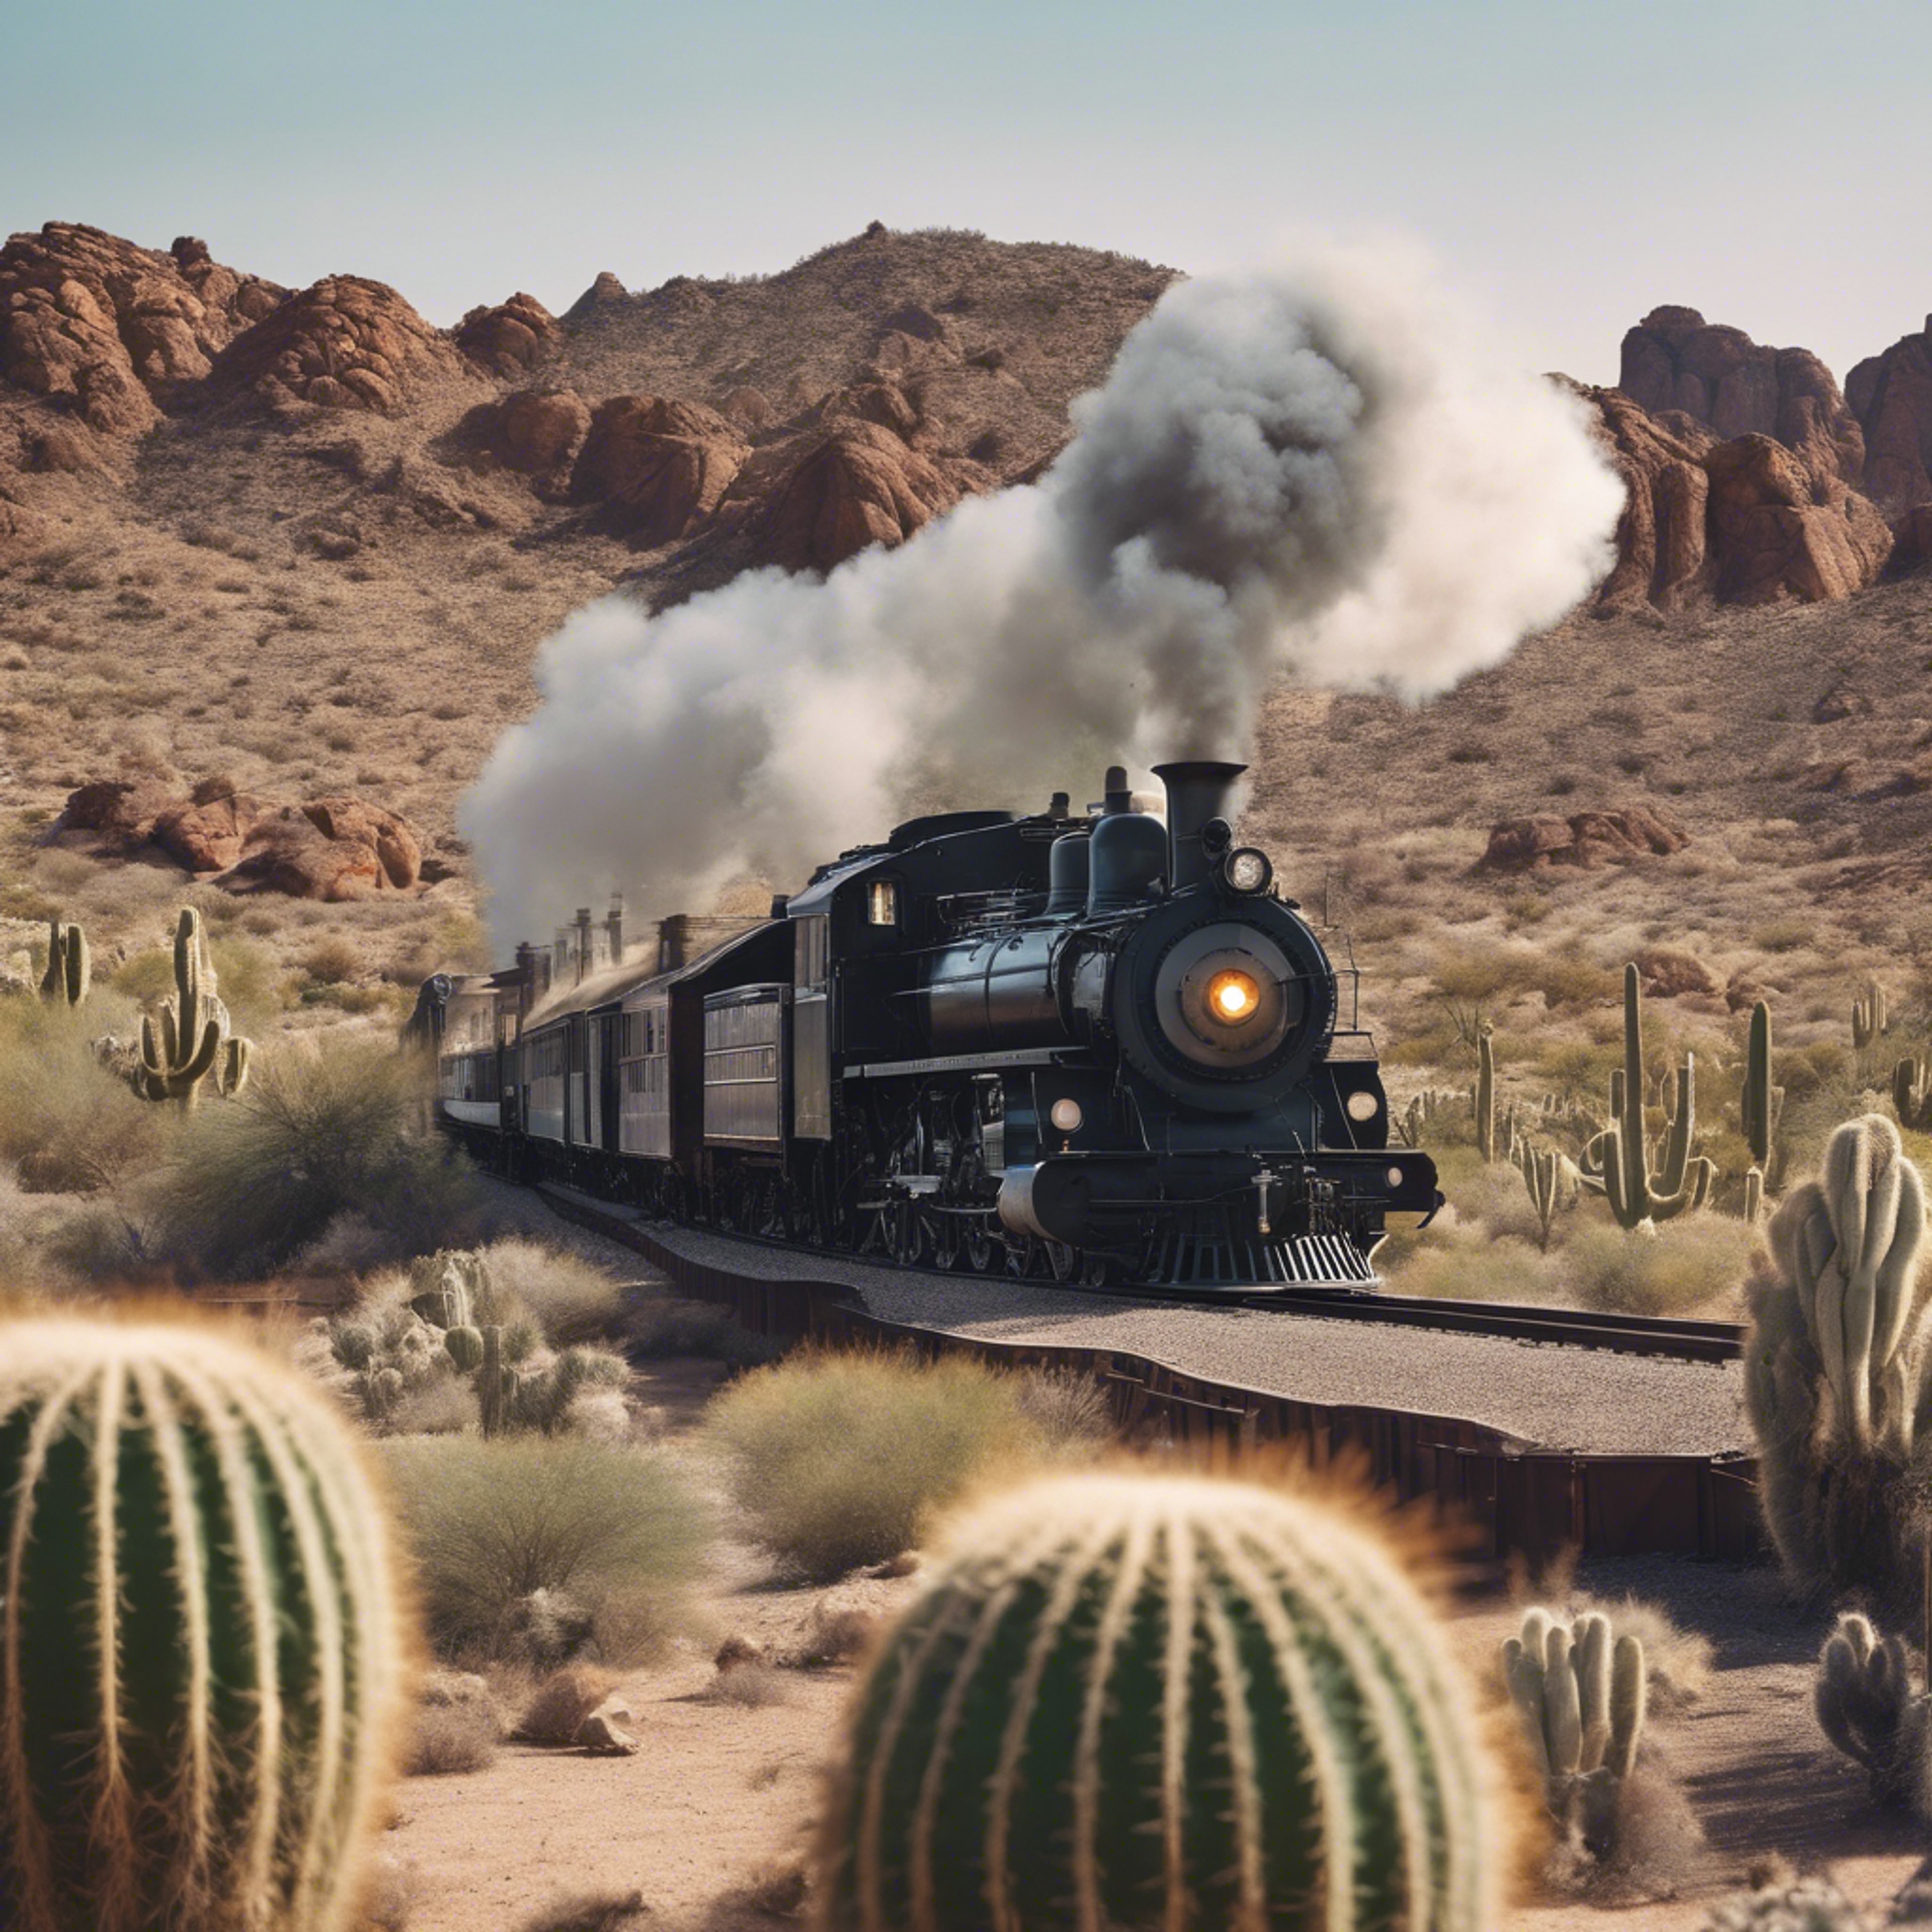 A locomotive steam train rushing across the barren Western landscape surrounded by towering cacti. Papel de parede[f5a4930d44454dd795f5]